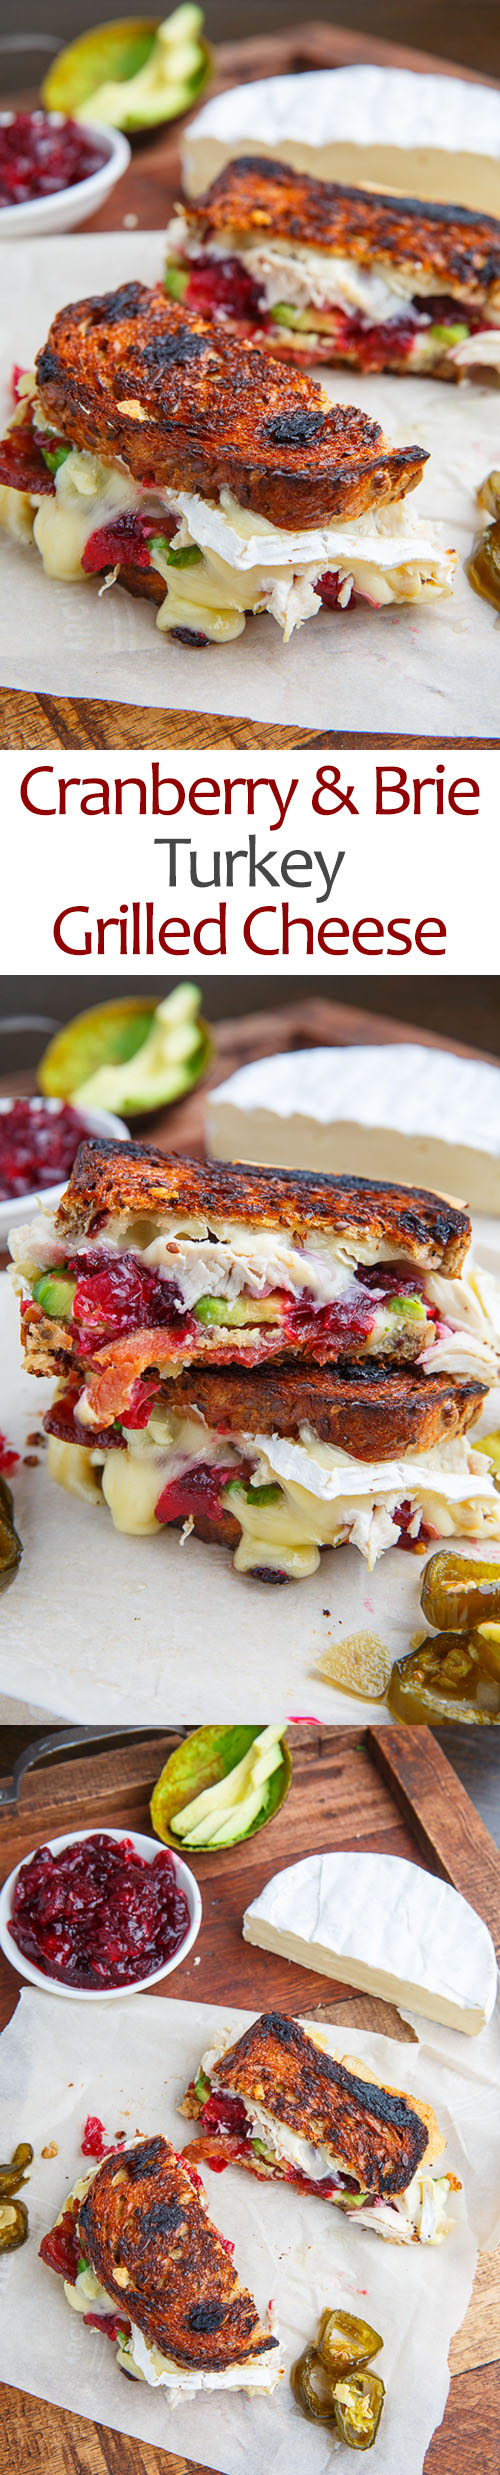 Cranberry and Brie Turkey Grilled Cheese with Avocado and Bacon